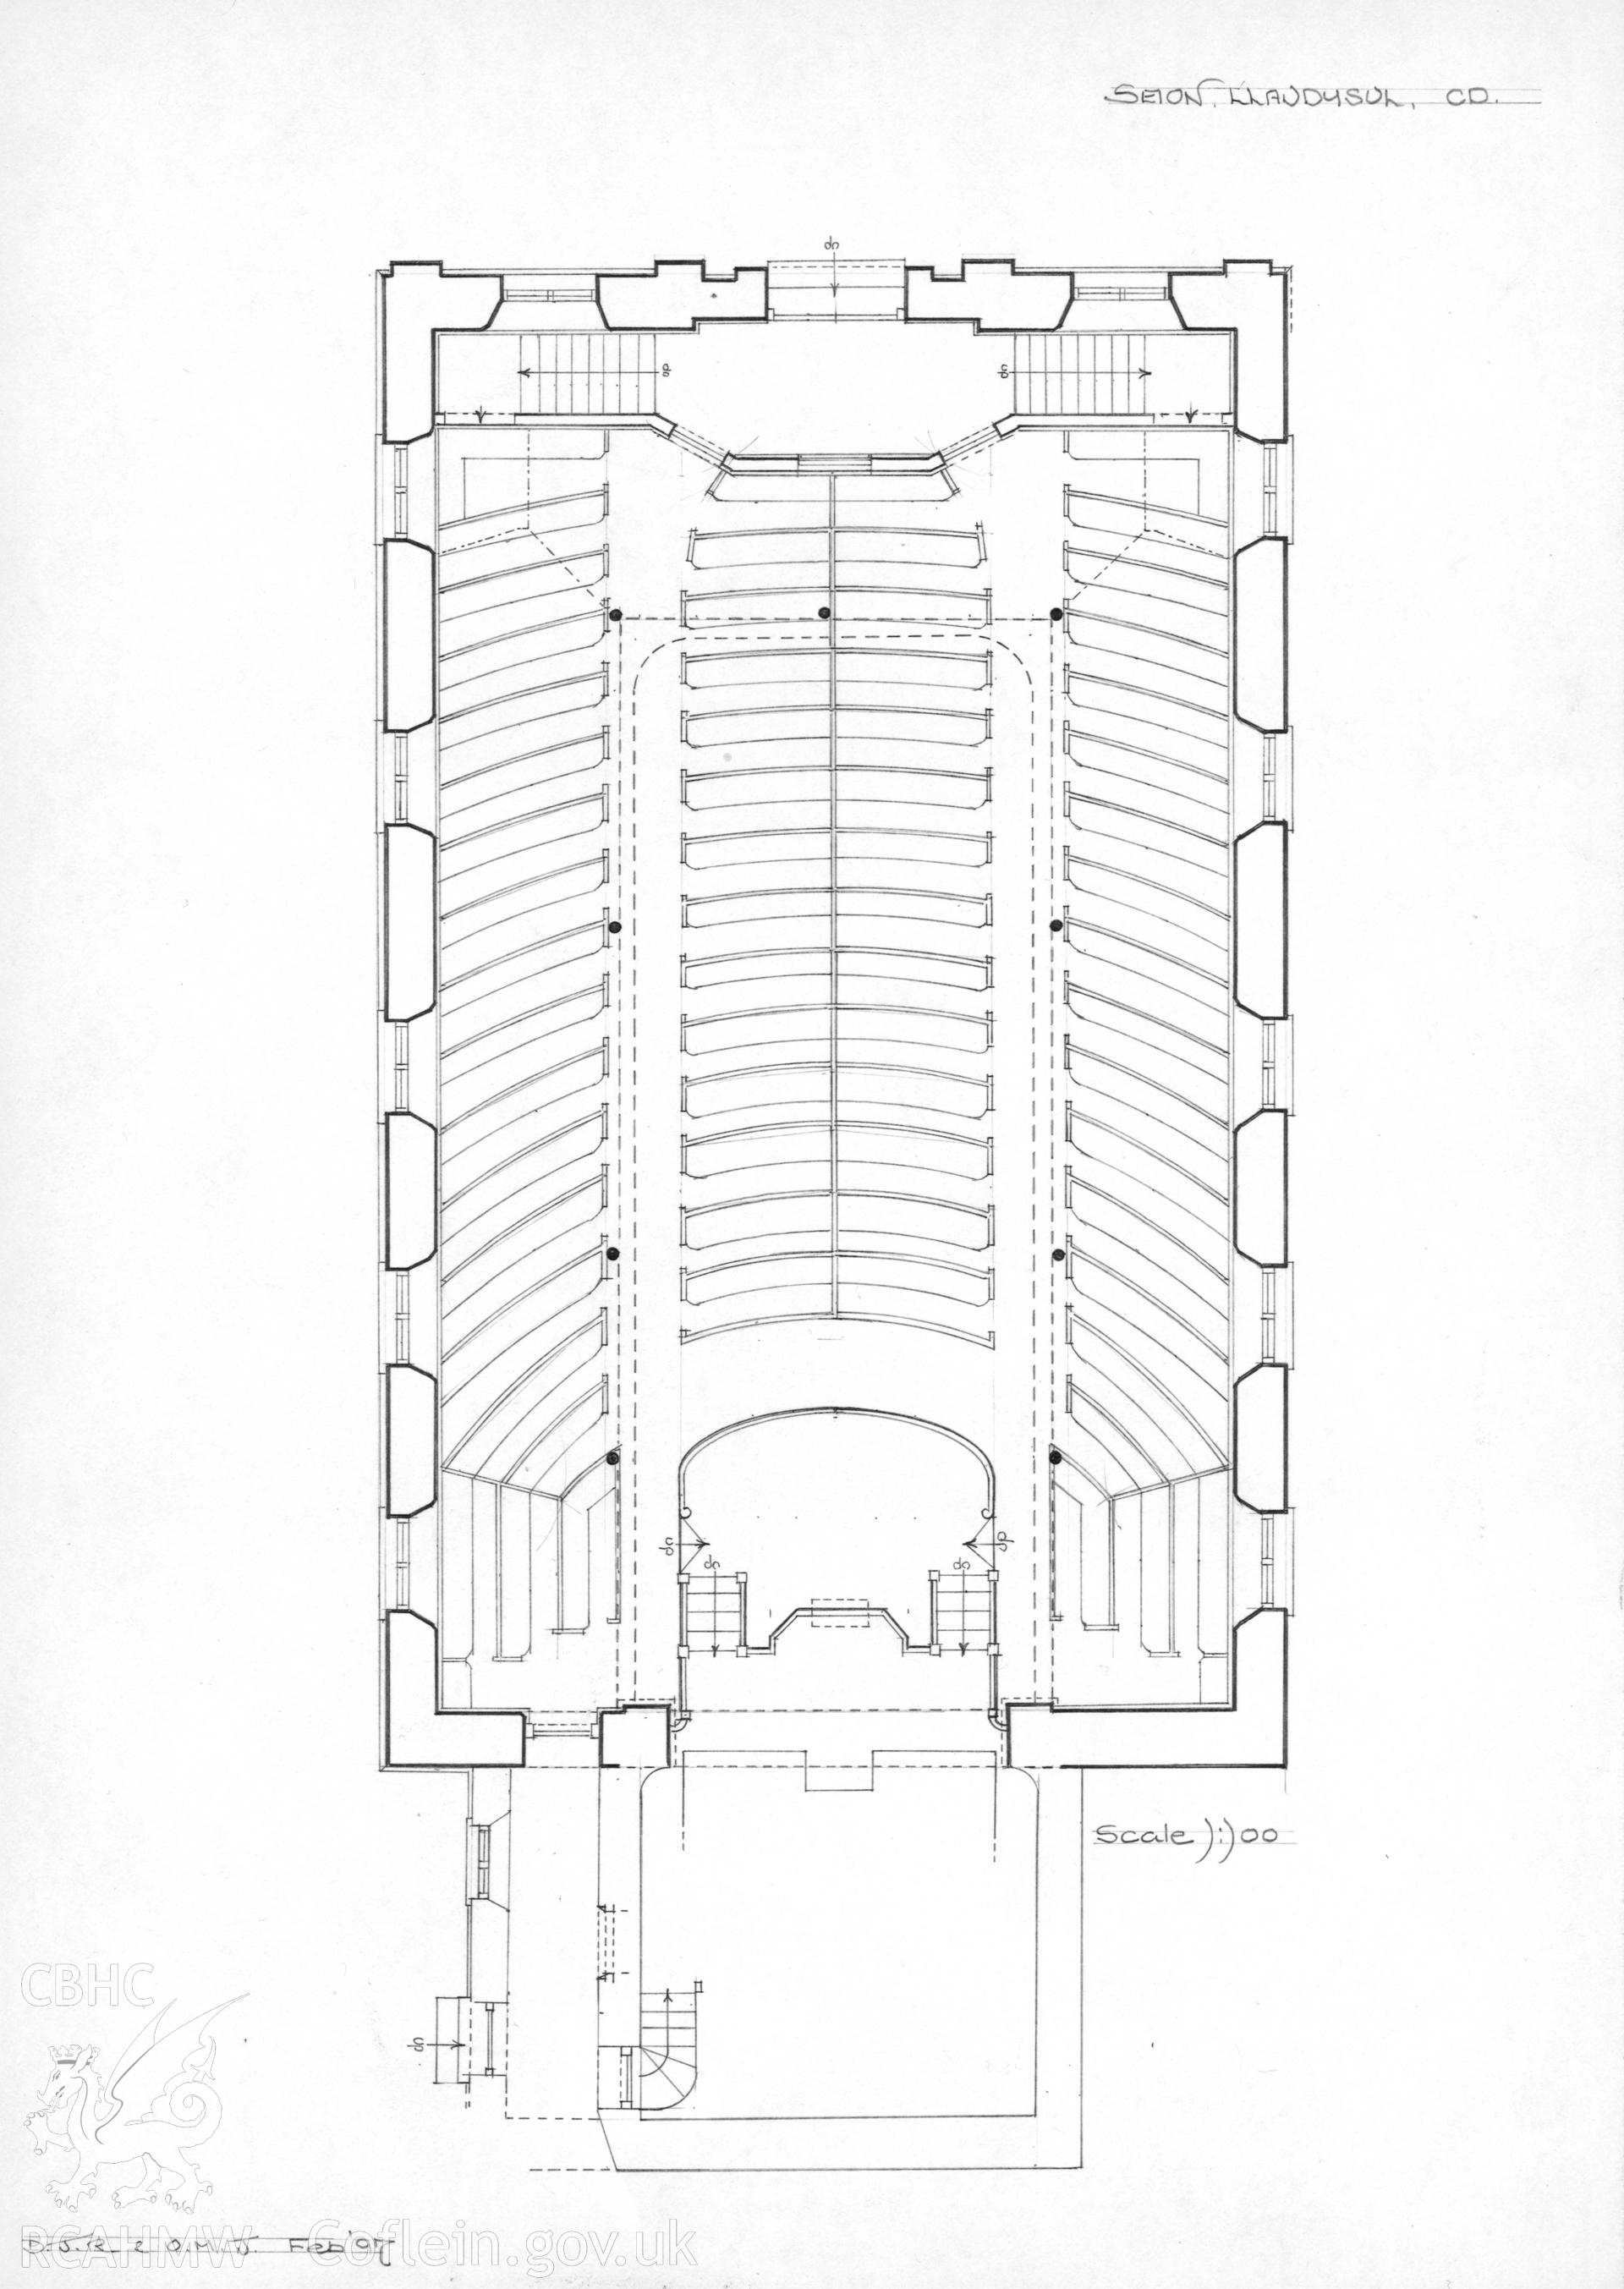 Seion Chapel, Llandysul; Measured drawing by Dylan Roberts and Olwen Jenkins dated February 1997, showing seating plan of chapel.